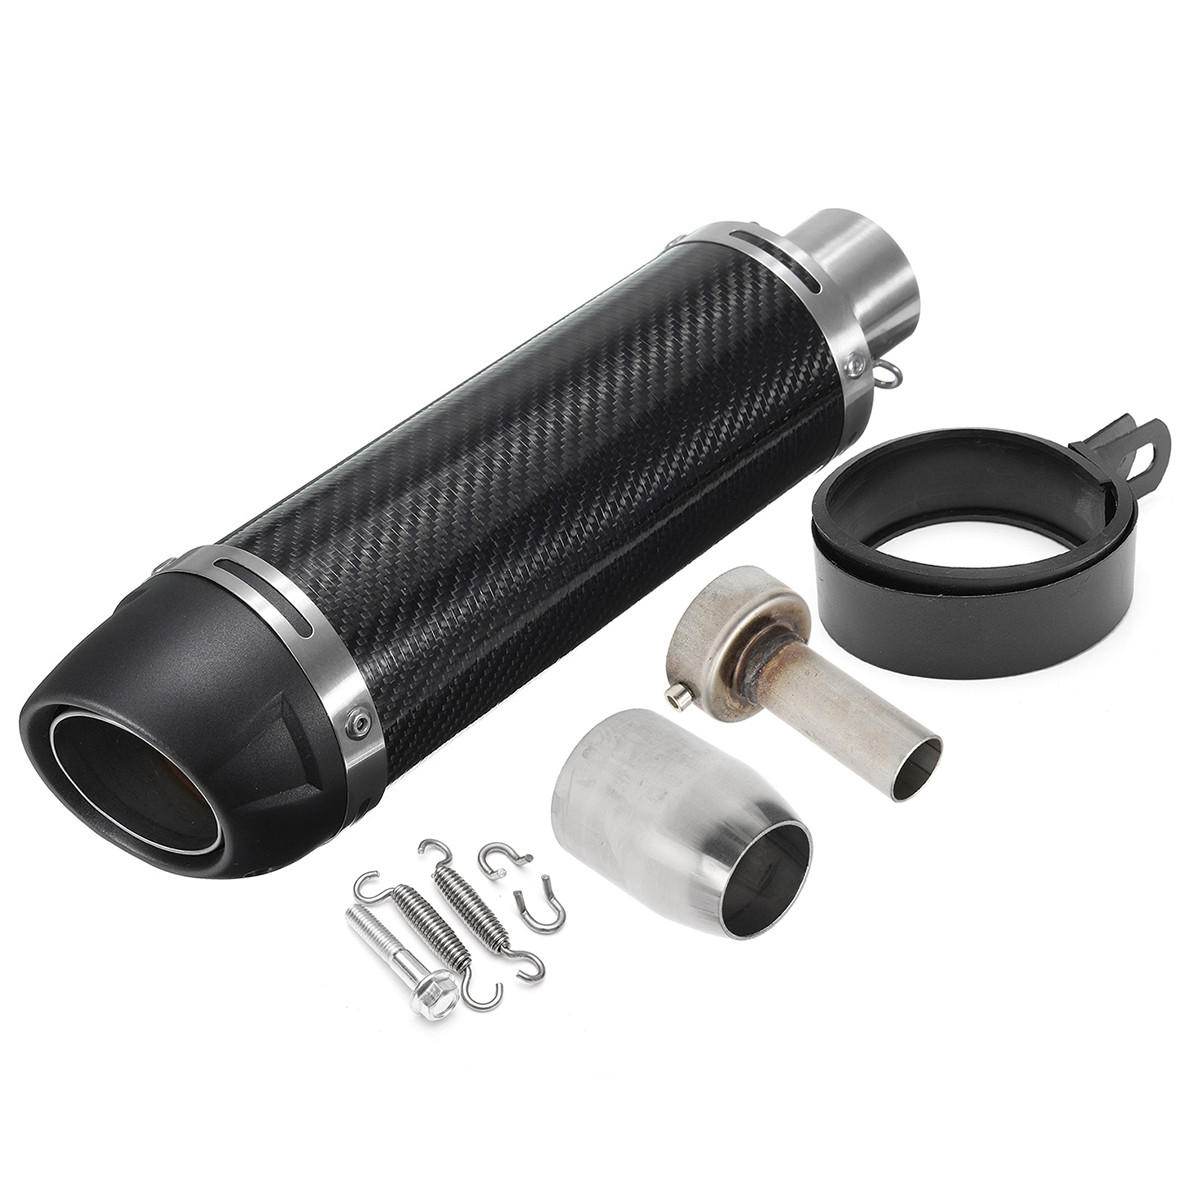 38-51mm universal motorcycle carbon fiber exhaust muffler pipe with